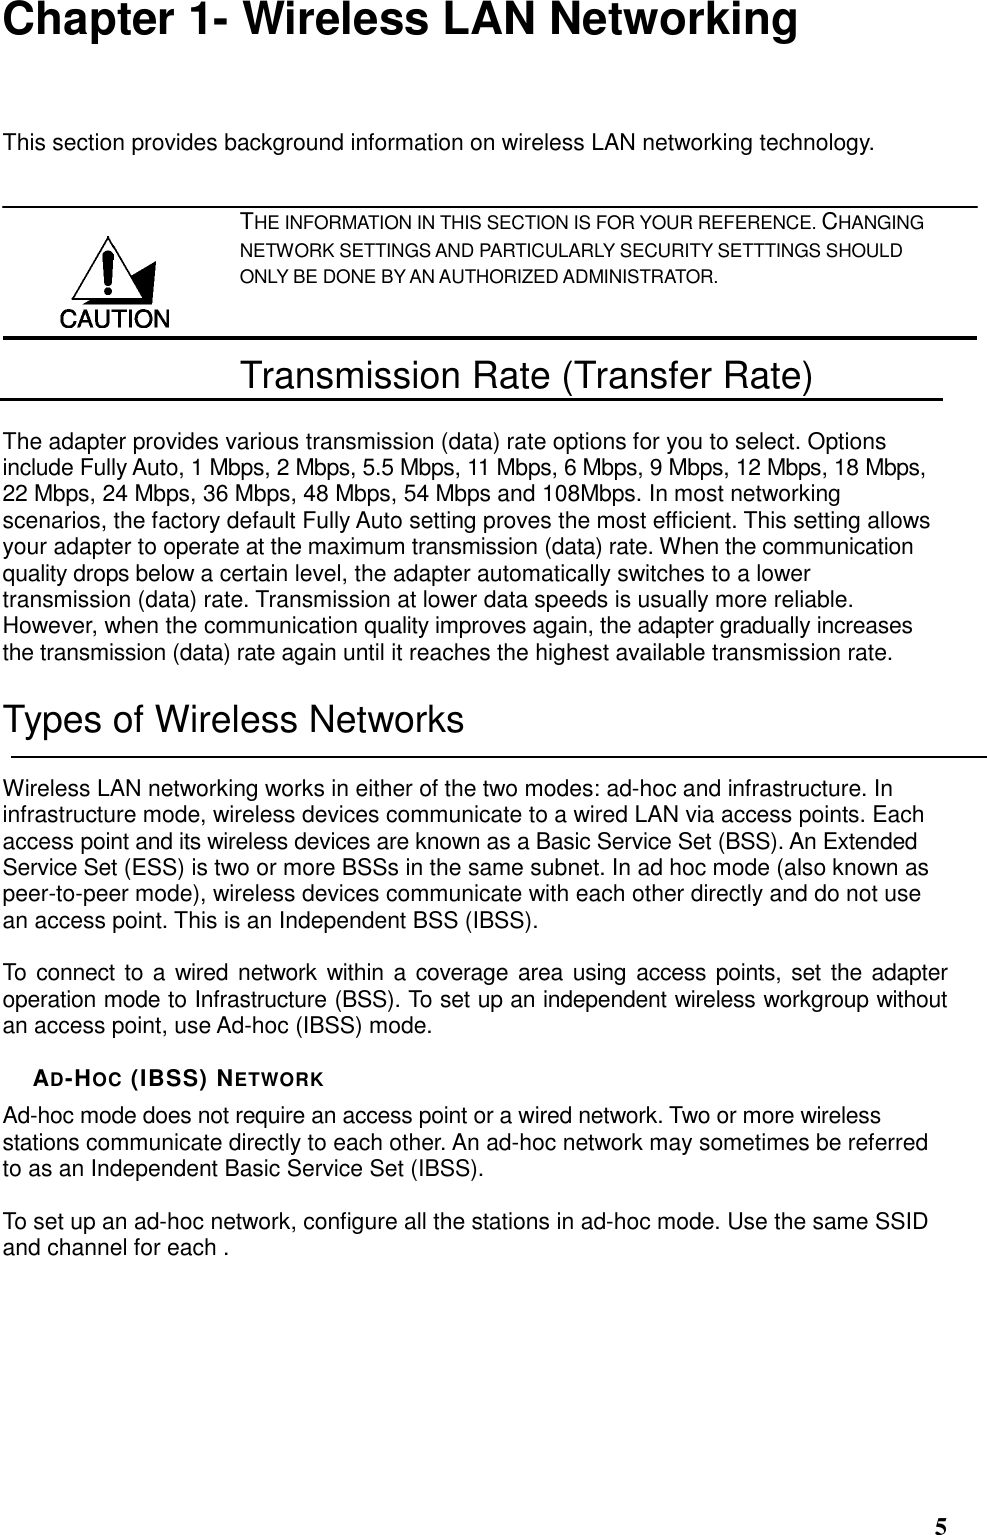  5 Chapter 1- Wireless LAN Networking This section provides background information on wireless LAN networking technology.   THE INFORMATION IN THIS SECTION IS FOR YOUR REFERENCE. CHANGING NETWORK SETTINGS AND PARTICULARLY SECURITY SETTTINGS SHOULD ONLY BE DONE BY AN AUTHORIZED ADMINISTRATOR. Transmission Rate (Transfer Rate) The adapter provides various transmission (data) rate options for you to select. Options include Fully Auto, 1 Mbps, 2 Mbps, 5.5 Mbps, 11 Mbps, 6 Mbps, 9 Mbps, 12 Mbps, 18 Mbps, 22 Mbps, 24 Mbps, 36 Mbps, 48 Mbps, 54 Mbps and 108Mbps. In most networking scenarios, the factory default Fully Auto setting proves the most efficient. This setting allows your adapter to operate at the maximum transmission (data) rate. When the communication quality drops below a certain level, the adapter automatically switches to a lower transmission (data) rate. Transmission at lower data speeds is usually more reliable. However, when the communication quality improves again, the adapter gradually increases the transmission (data) rate again until it reaches the highest available transmission rate. Types of Wireless Networks Wireless LAN networking works in either of the two modes: ad-hoc and infrastructure. In infrastructure mode, wireless devices communicate to a wired LAN via access points. Each access point and its wireless devices are known as a Basic Service Set (BSS). An Extended Service Set (ESS) is two or more BSSs in the same subnet. In ad hoc mode (also known as peer-to-peer mode), wireless devices communicate with each other directly and do not use an access point. This is an Independent BSS (IBSS).  To connect to a wired network within a coverage area using access points, set the  adapter operation mode to Infrastructure (BSS). To set up an independent wireless workgroup without an access point, use Ad-hoc (IBSS) mode.  AD-HOC (IBSS) NETWORK Ad-hoc mode does not require an access point or a wired network. Two or more wireless stations communicate directly to each other. An ad-hoc network may sometimes be referred to as an Independent Basic Service Set (IBSS).  To set up an ad-hoc network, configure all the stations in ad-hoc mode. Use the same SSID and channel for each .  